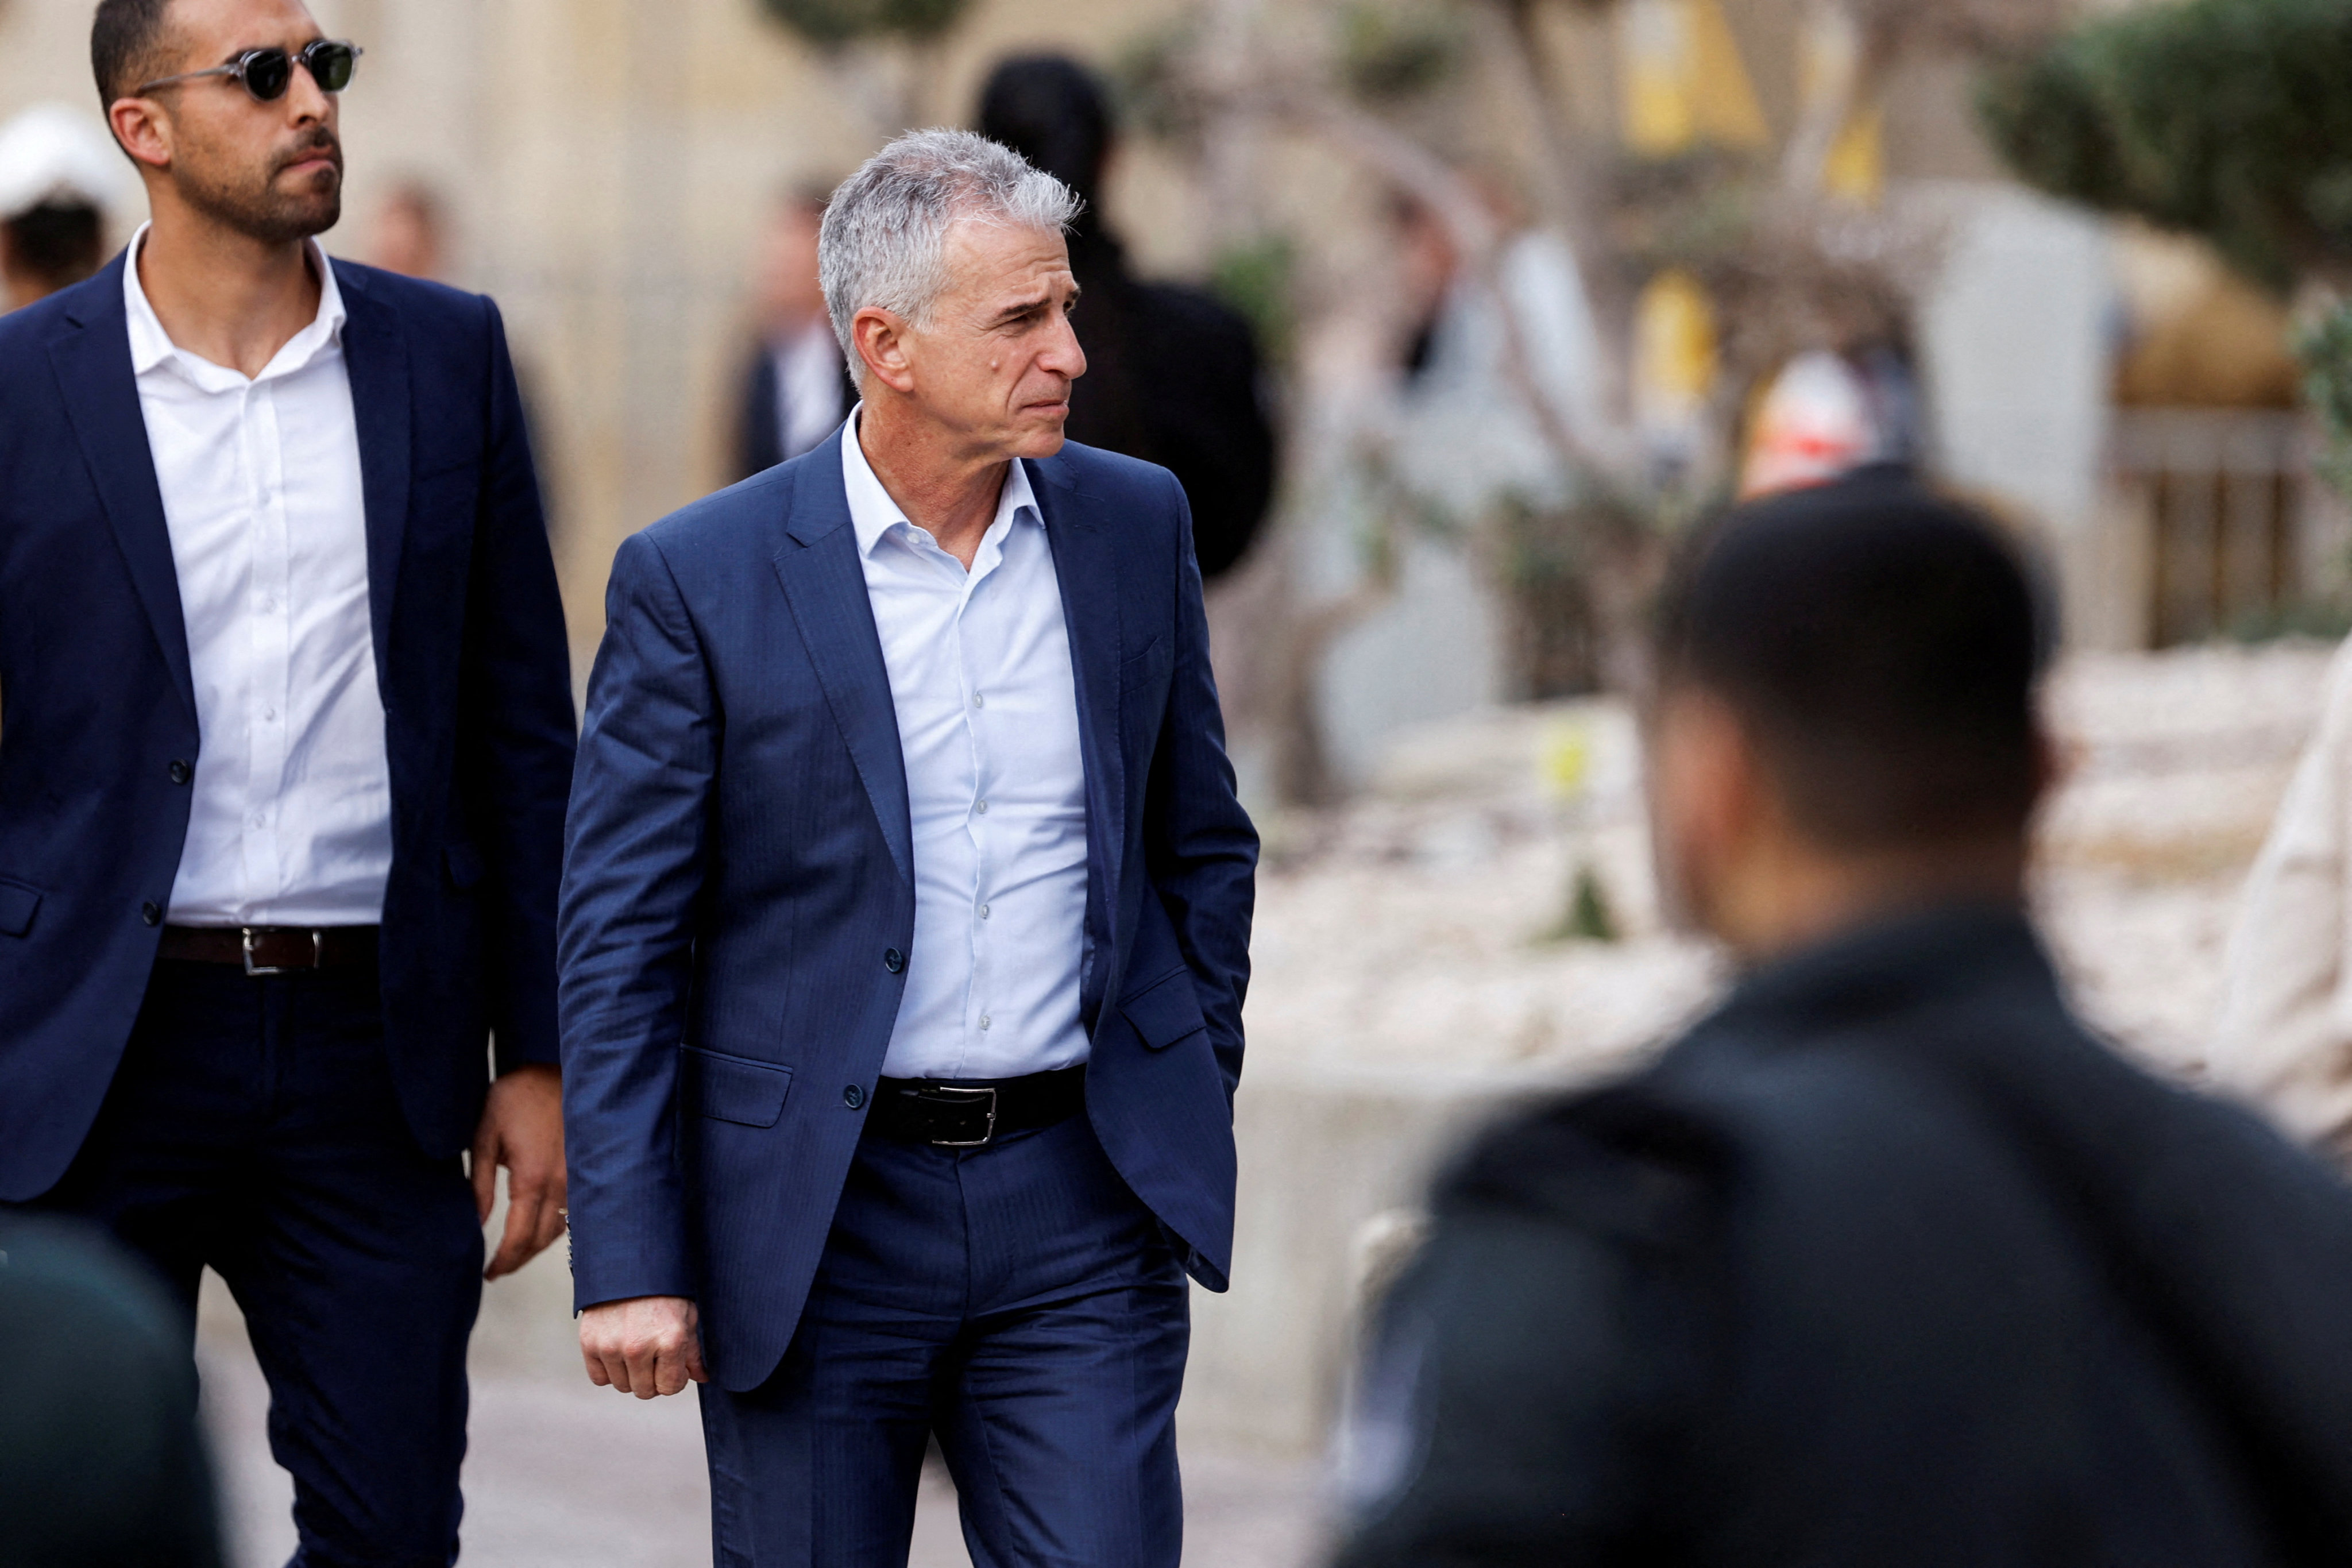 David Barnea, head of Mossad, attends an honour guard ceremony for Israel’s incoming military chief Herzi Halevi at Israel’s Defence Ministry in Tel Aviv on January 16, 2023. Photo: Reuters